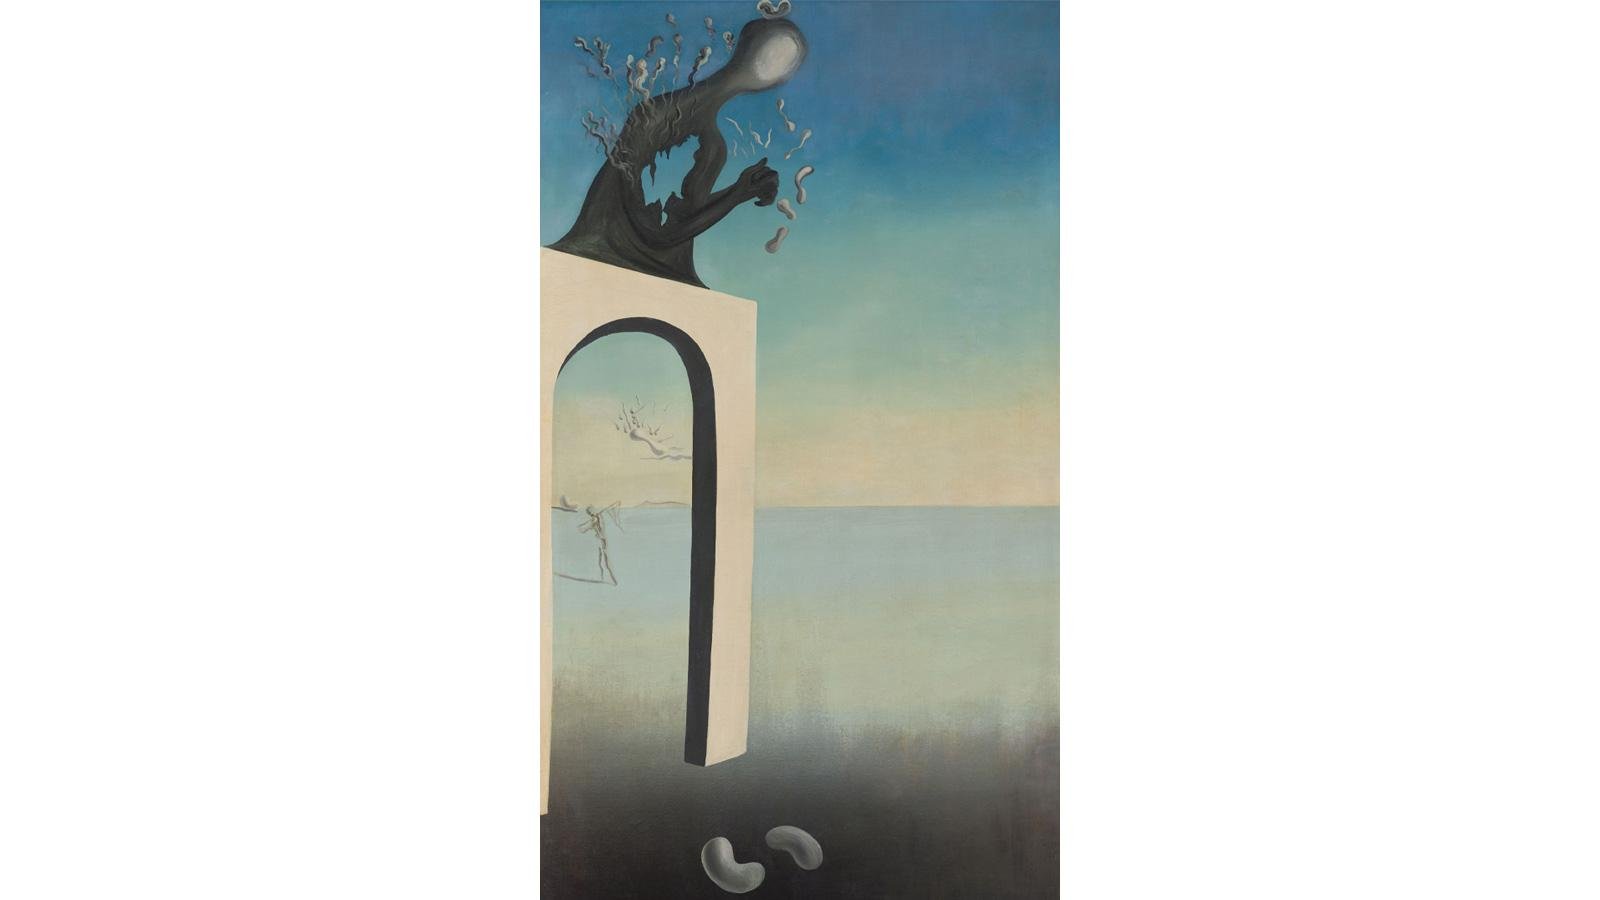 The nearly 7-foot-tall “Visions of Eternity” seemed to be an outlier among Salvador Dalí's work from the 1930s. (Salvador Dalí / Fundació Gala-Salvador Dalí / Artists Rights Society)